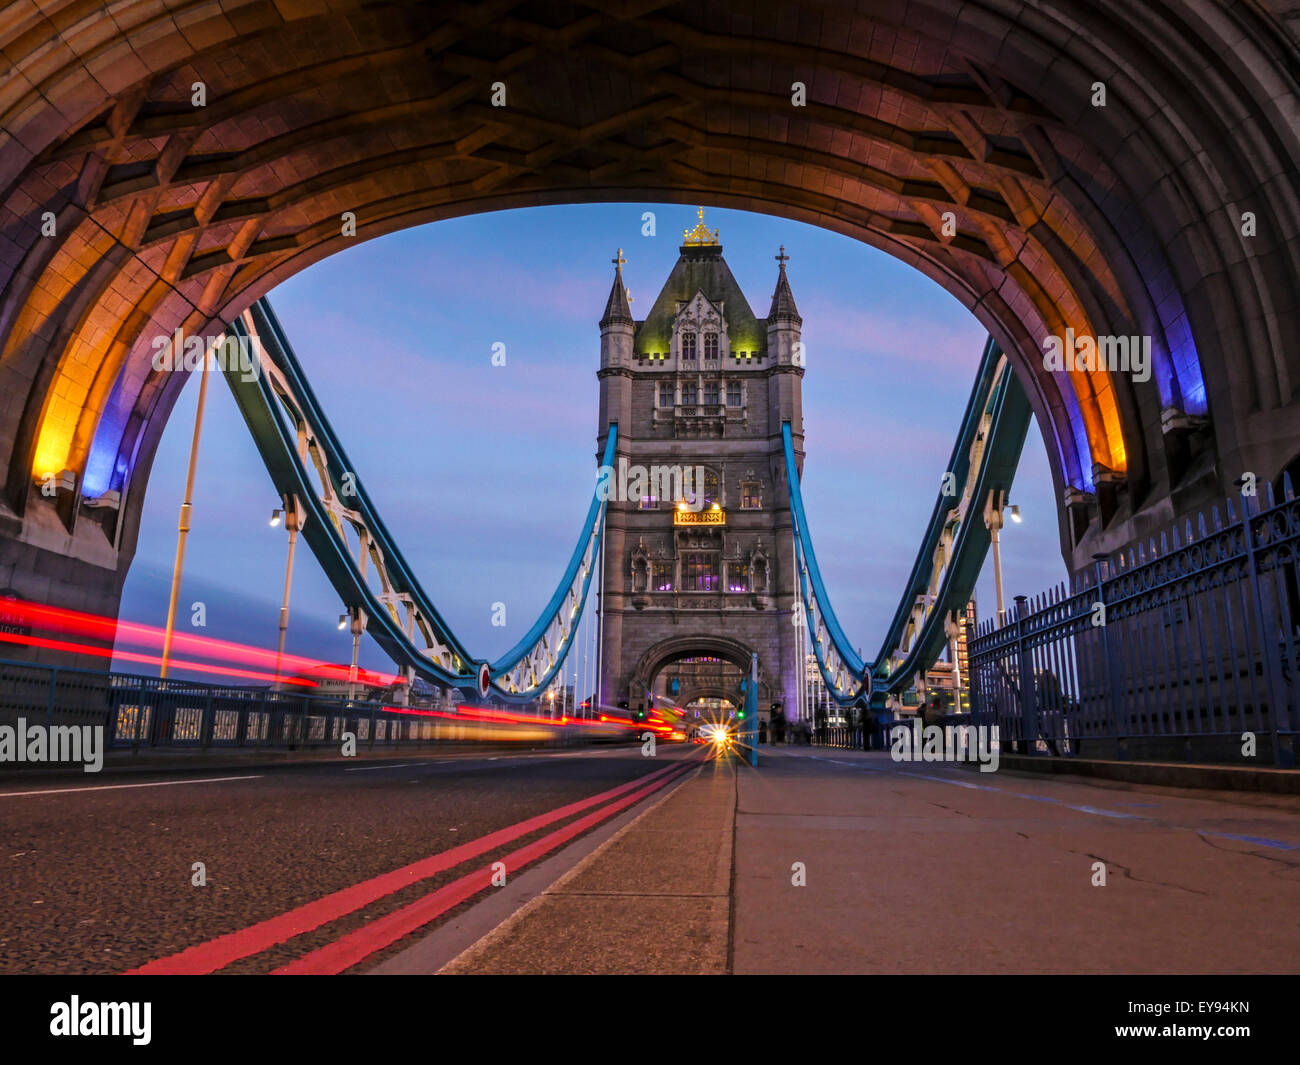 Rush hour in London, view to the Tower Bridge night, time lapse Stock Photo